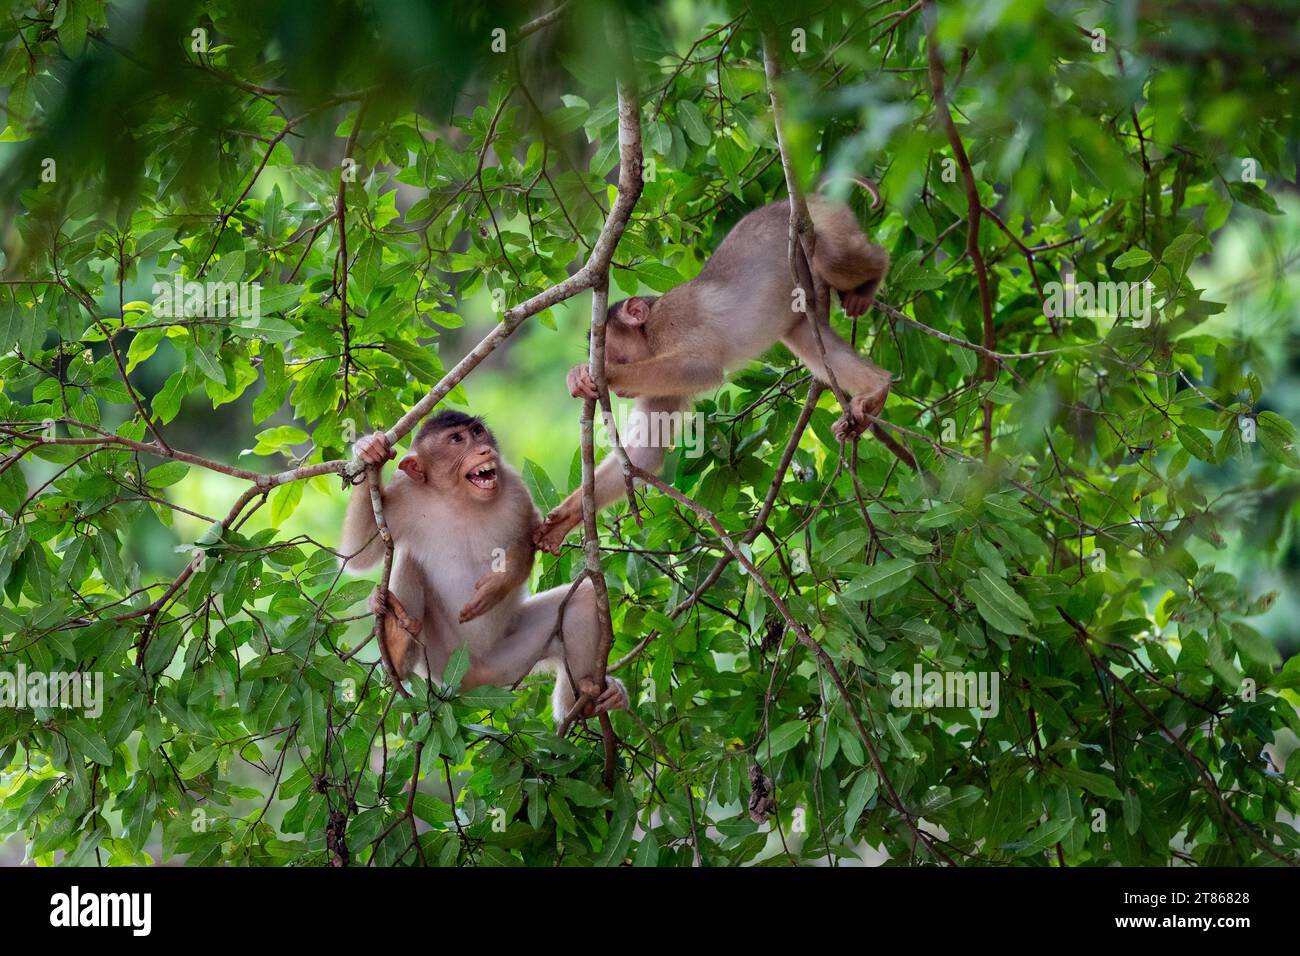 Pair of macaques, Macaca, argue while clinging to a tree branchs in the Borneo rainforest Stock Photo